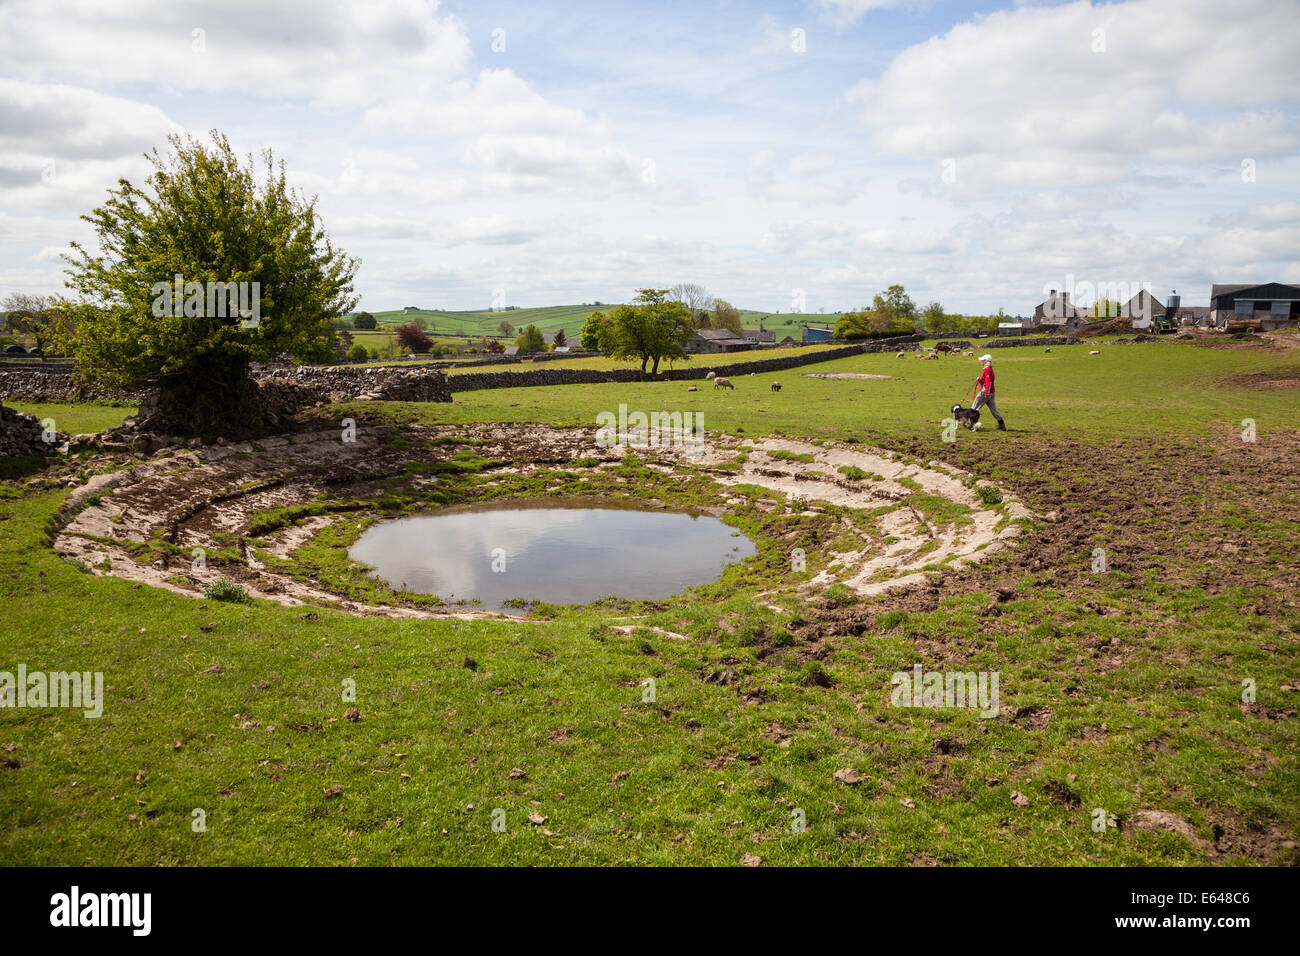 A woman walking with her dog next to a dew pond at Alstonefield, Staffordshire, England, UK Stock Photo